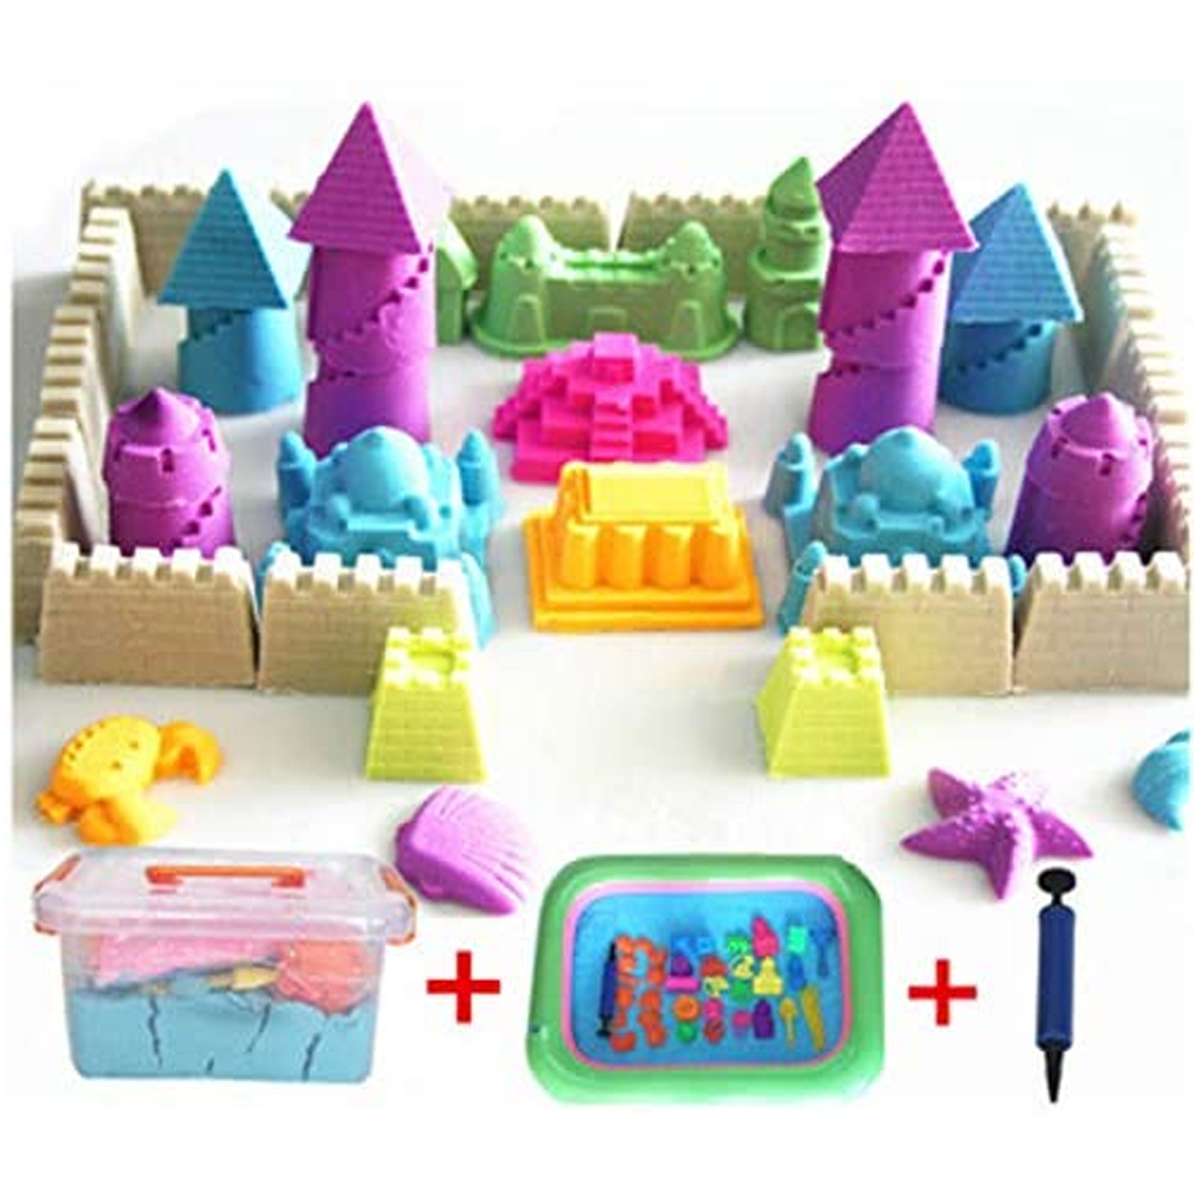 Magic Sand Toy Set with Modeling Tools (2 Kg) - PInk